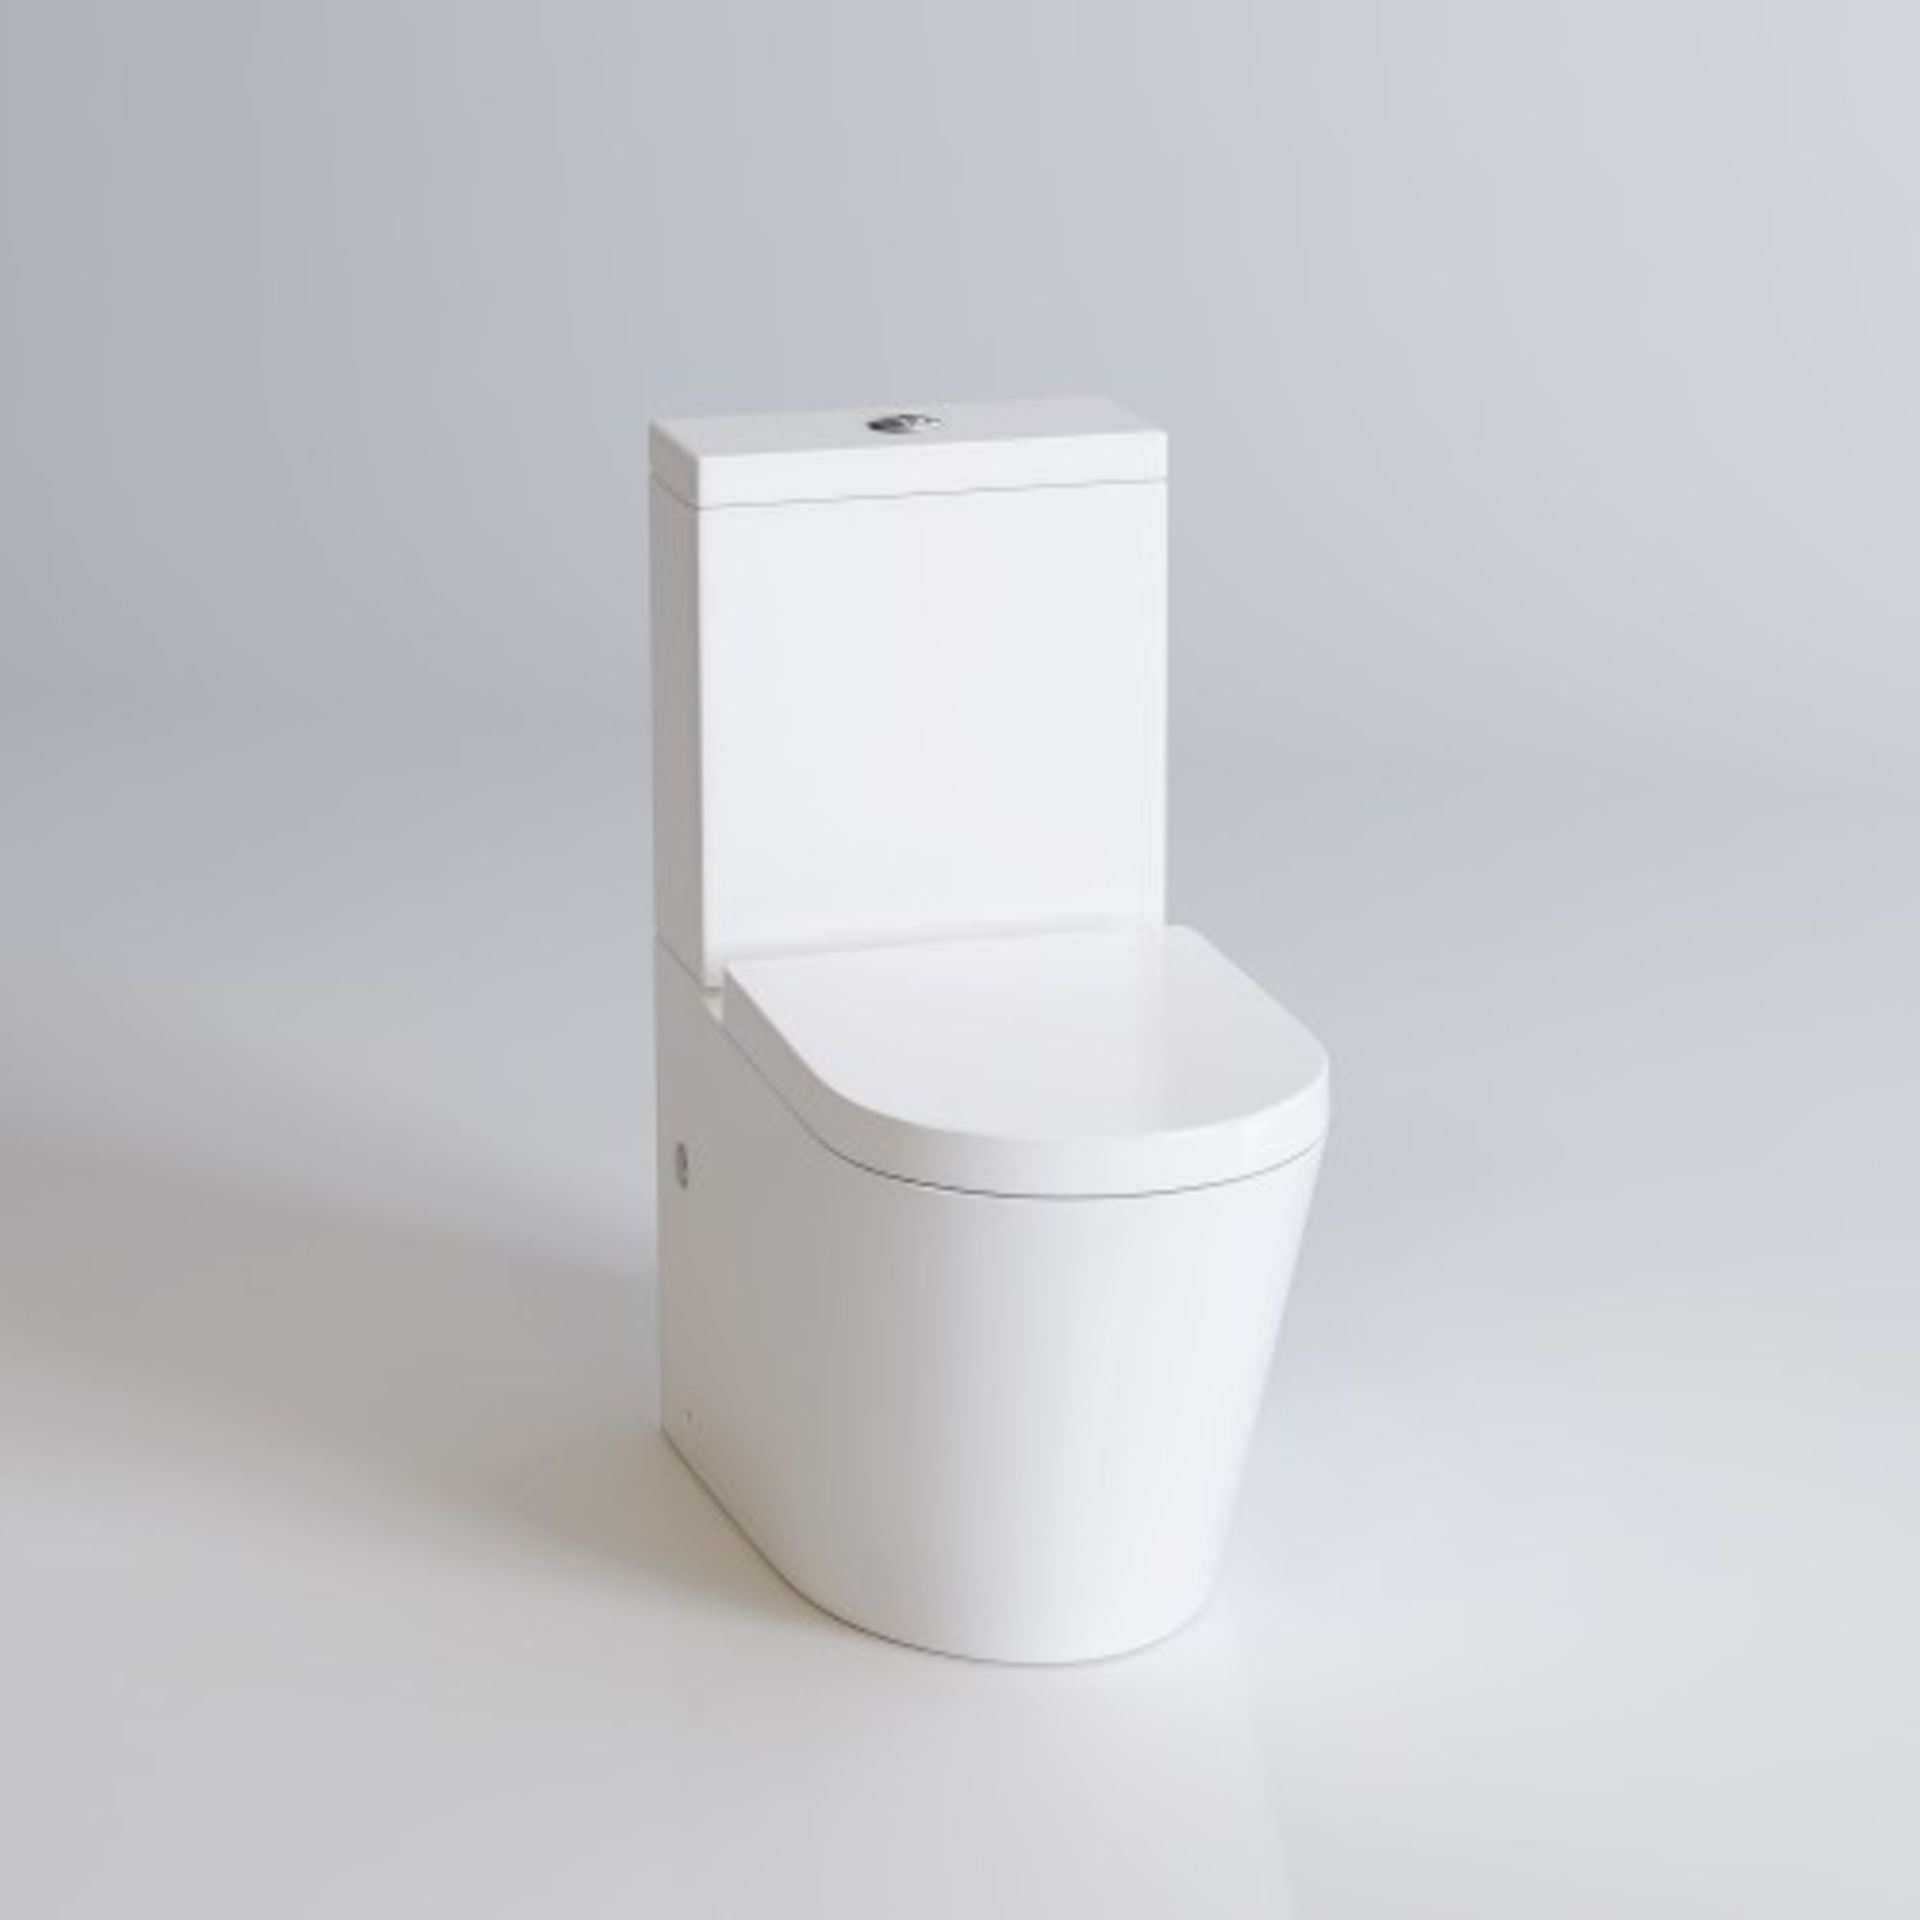 NEW Lyon II Close Coupled Toilet & Cistern inc Luxury Soft Close Seat. RRP £599.99.Lyon is a g... - Image 2 of 3